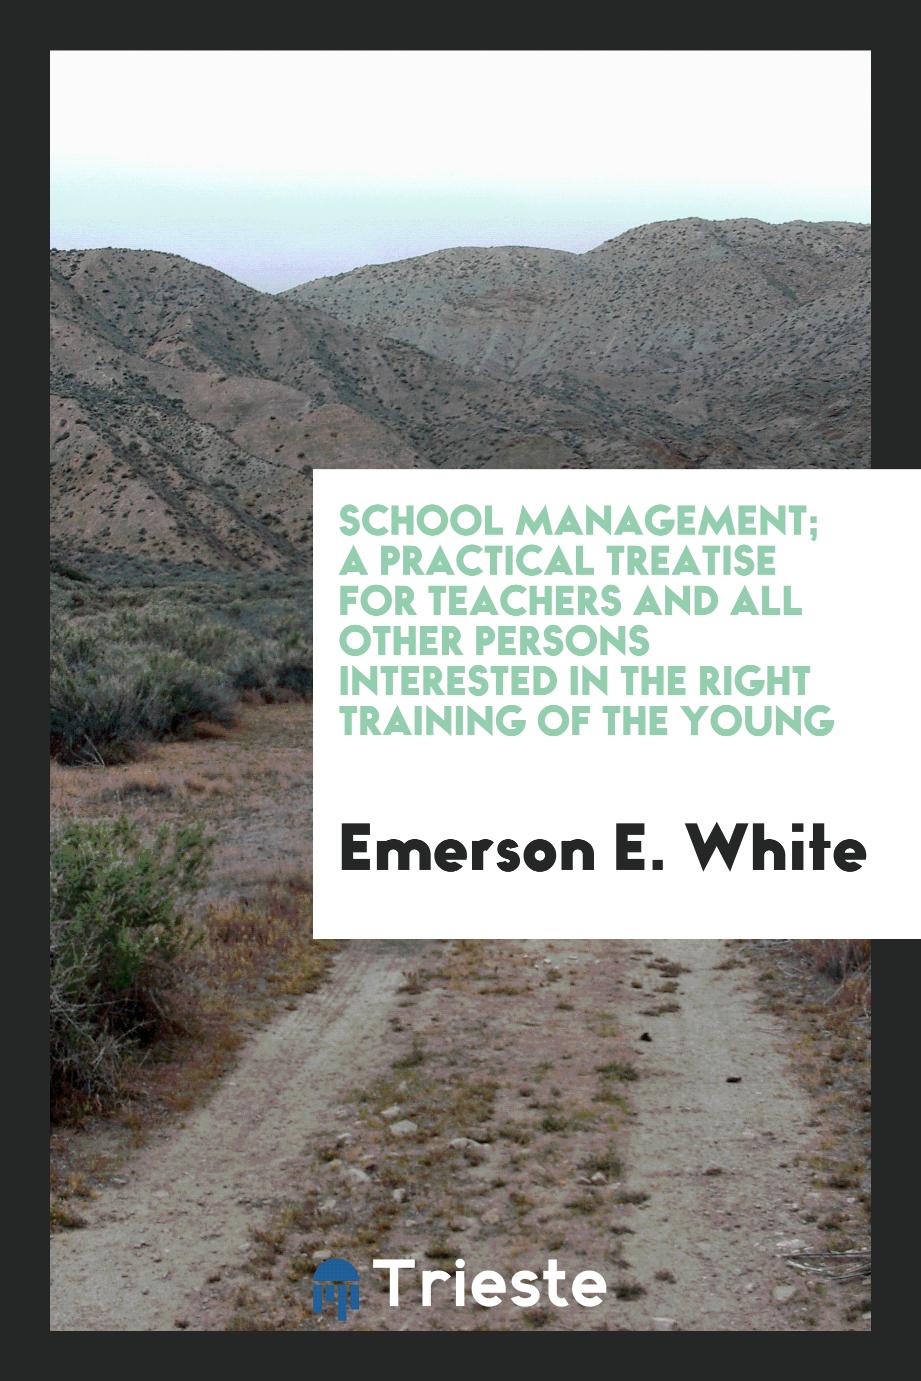 School Management; A Practical Treatise for Teachers and all Other Persons Interested in the Right Training of the Young